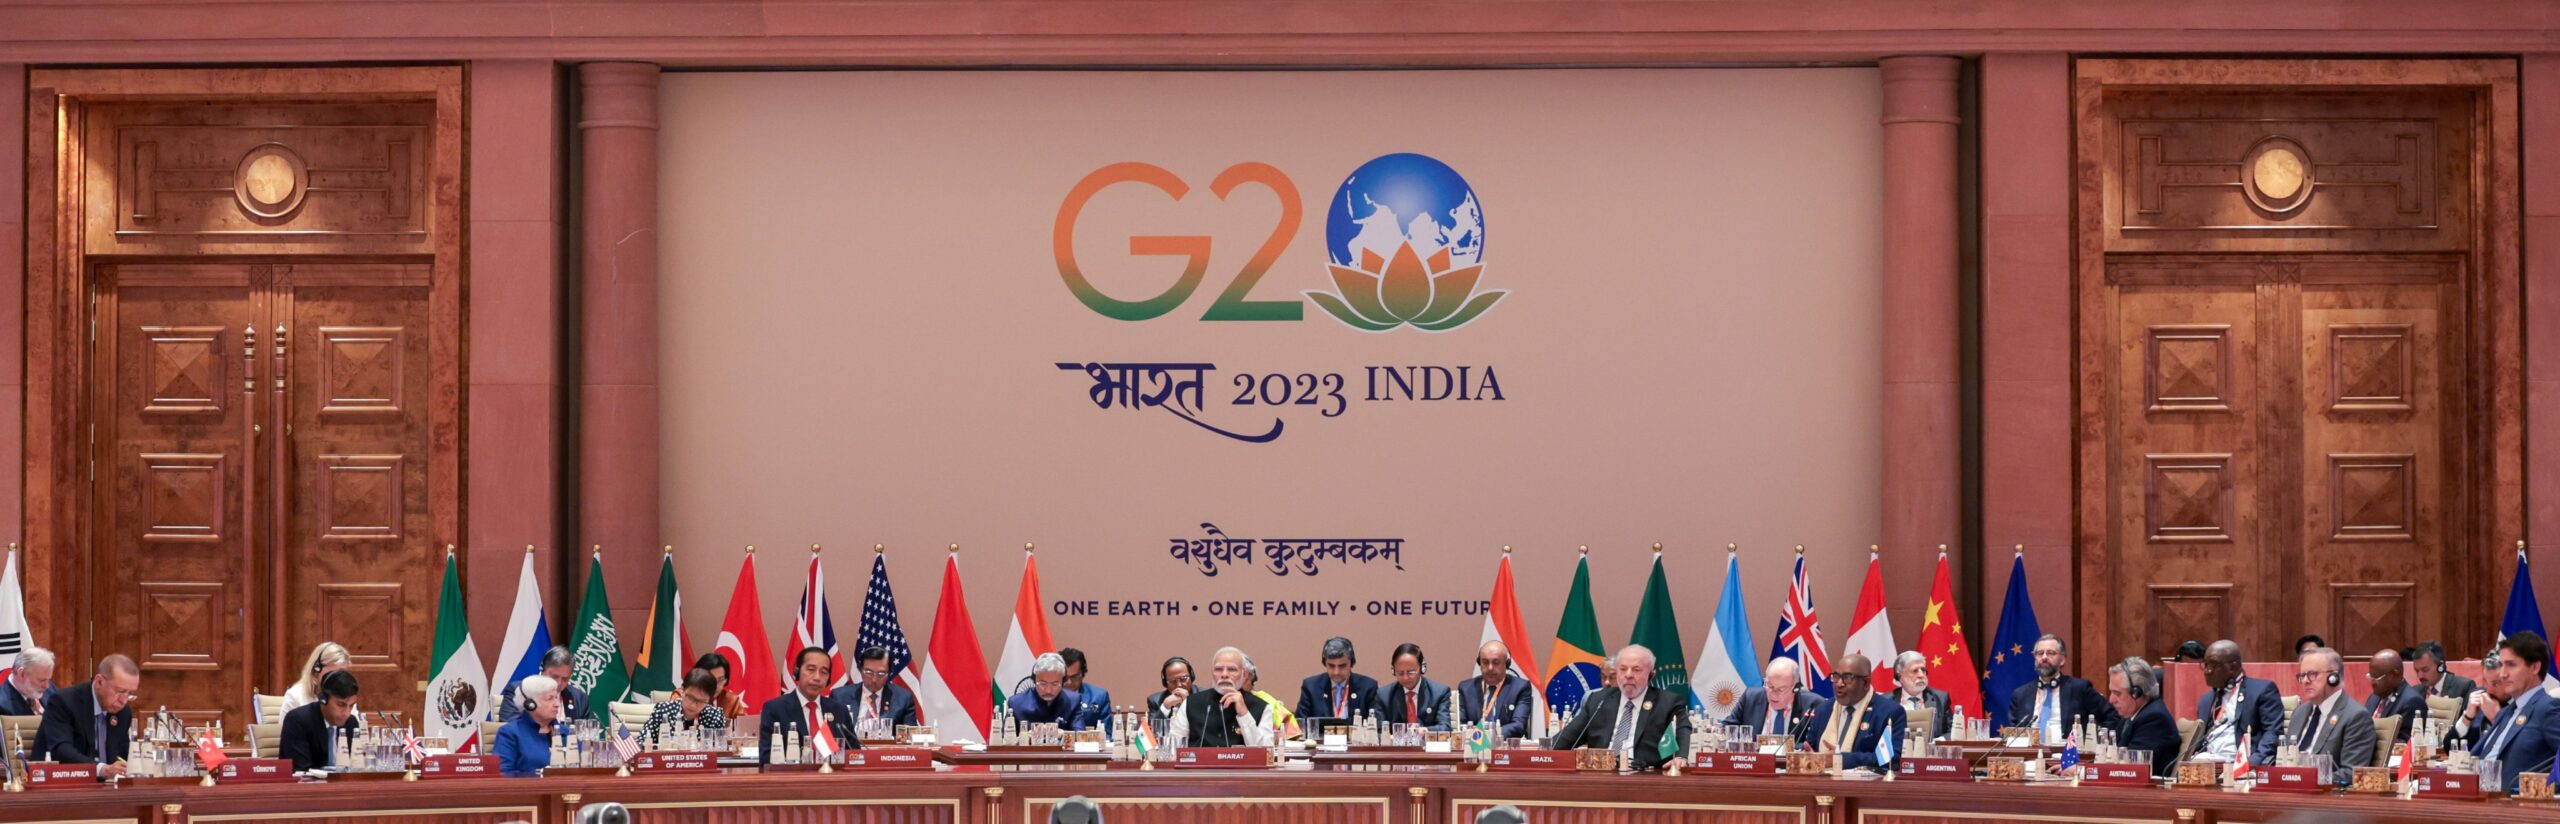 G20 Summit: Major rail and shipping project linking India to Middle East and Europe